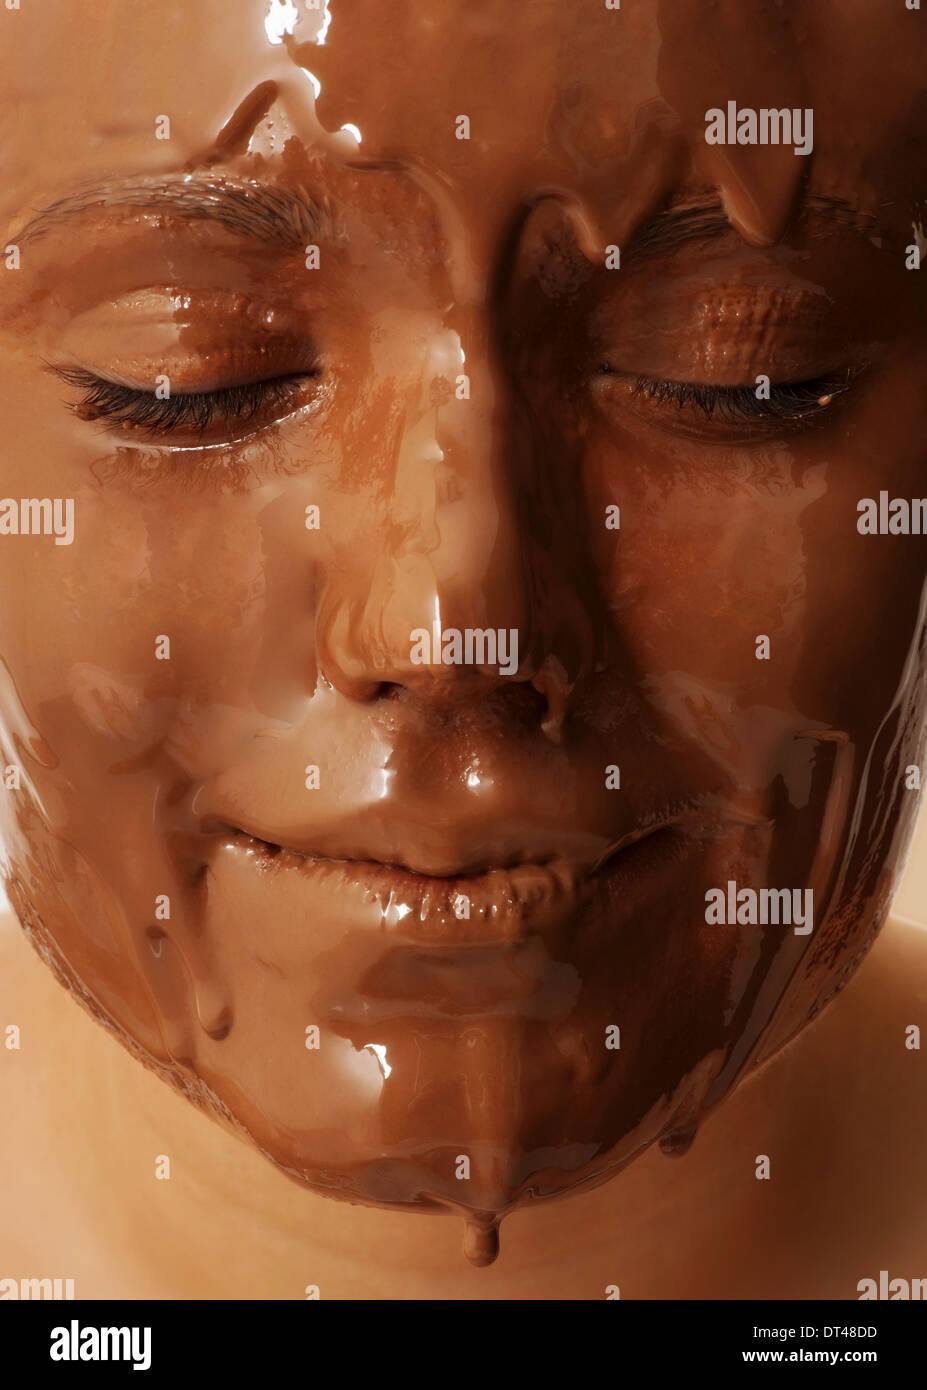 Girl with face covered in dripping chocolate. Stock Photo